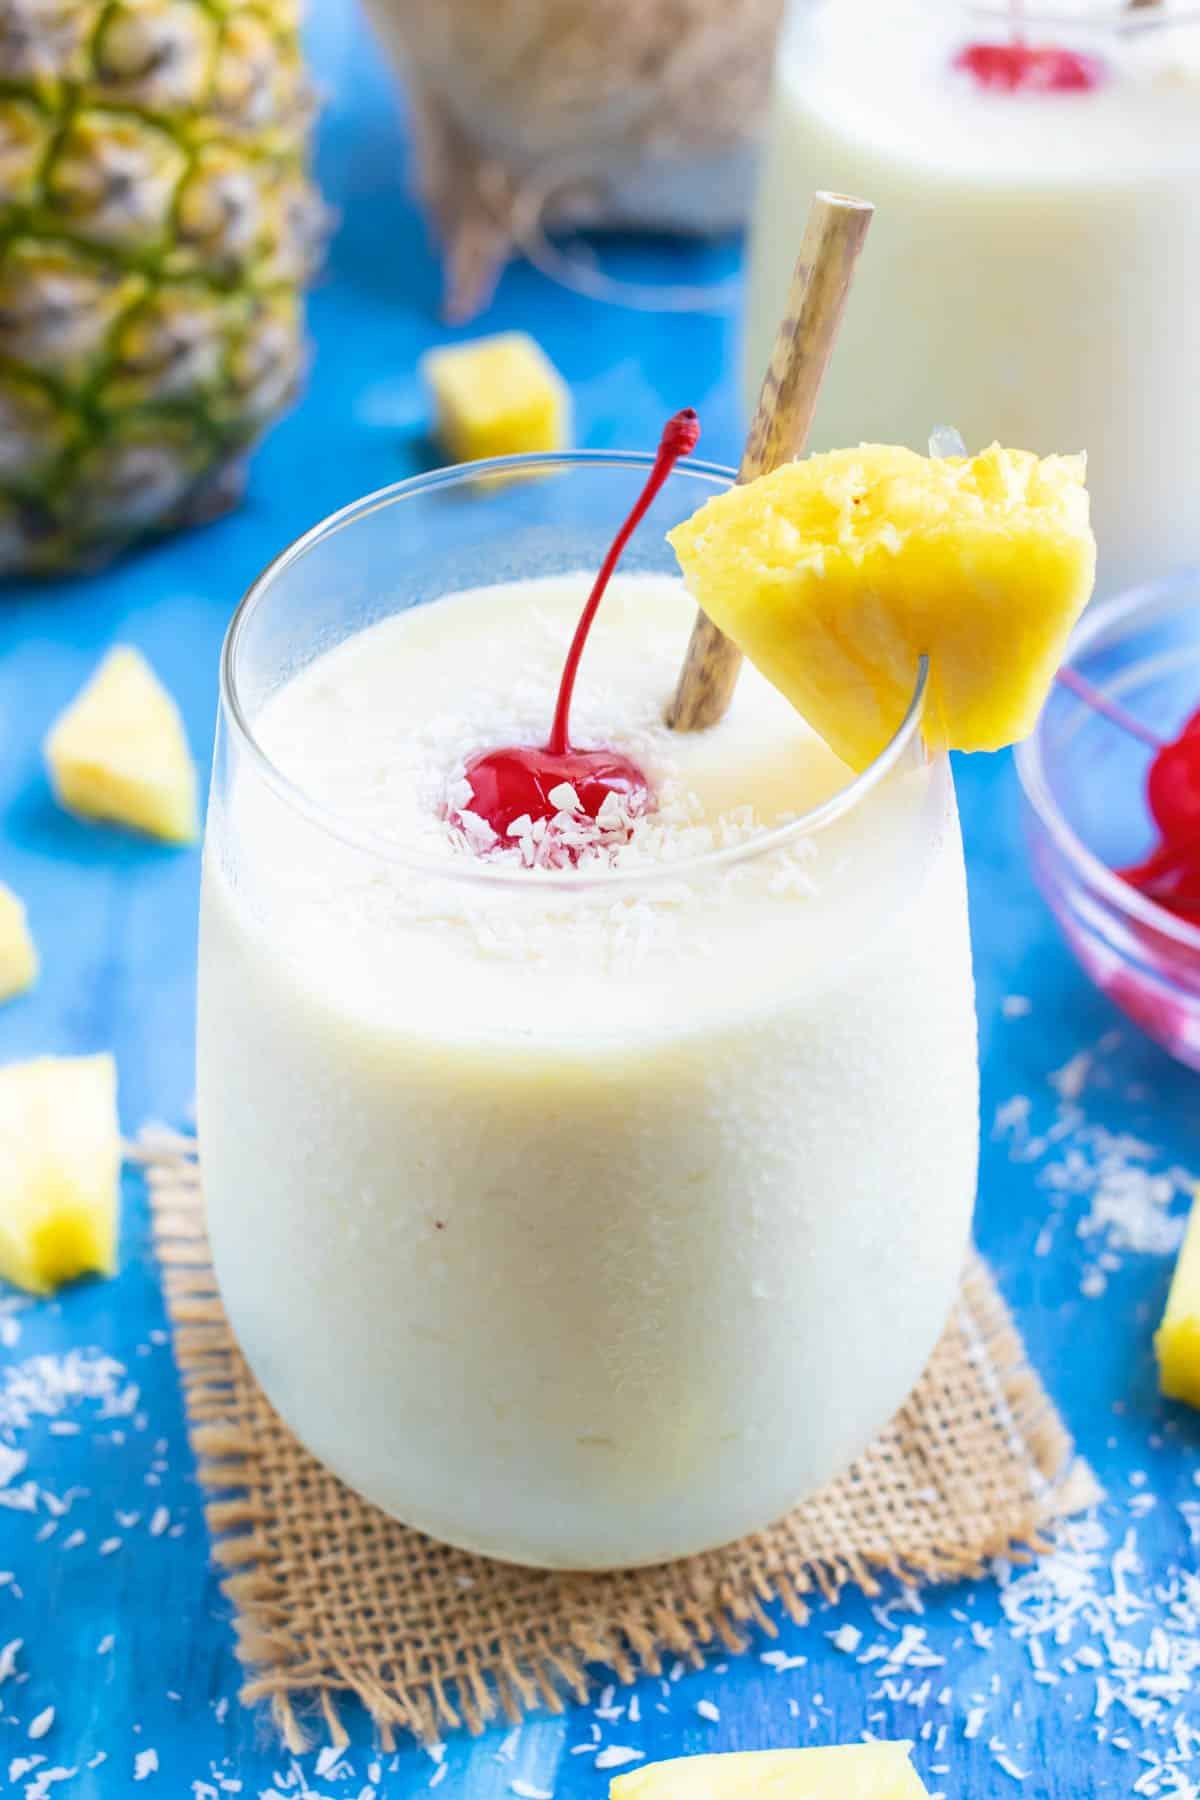 A frozen pina colada recipe in a clear glass with a pineapple wedge and a maraschino cherry.